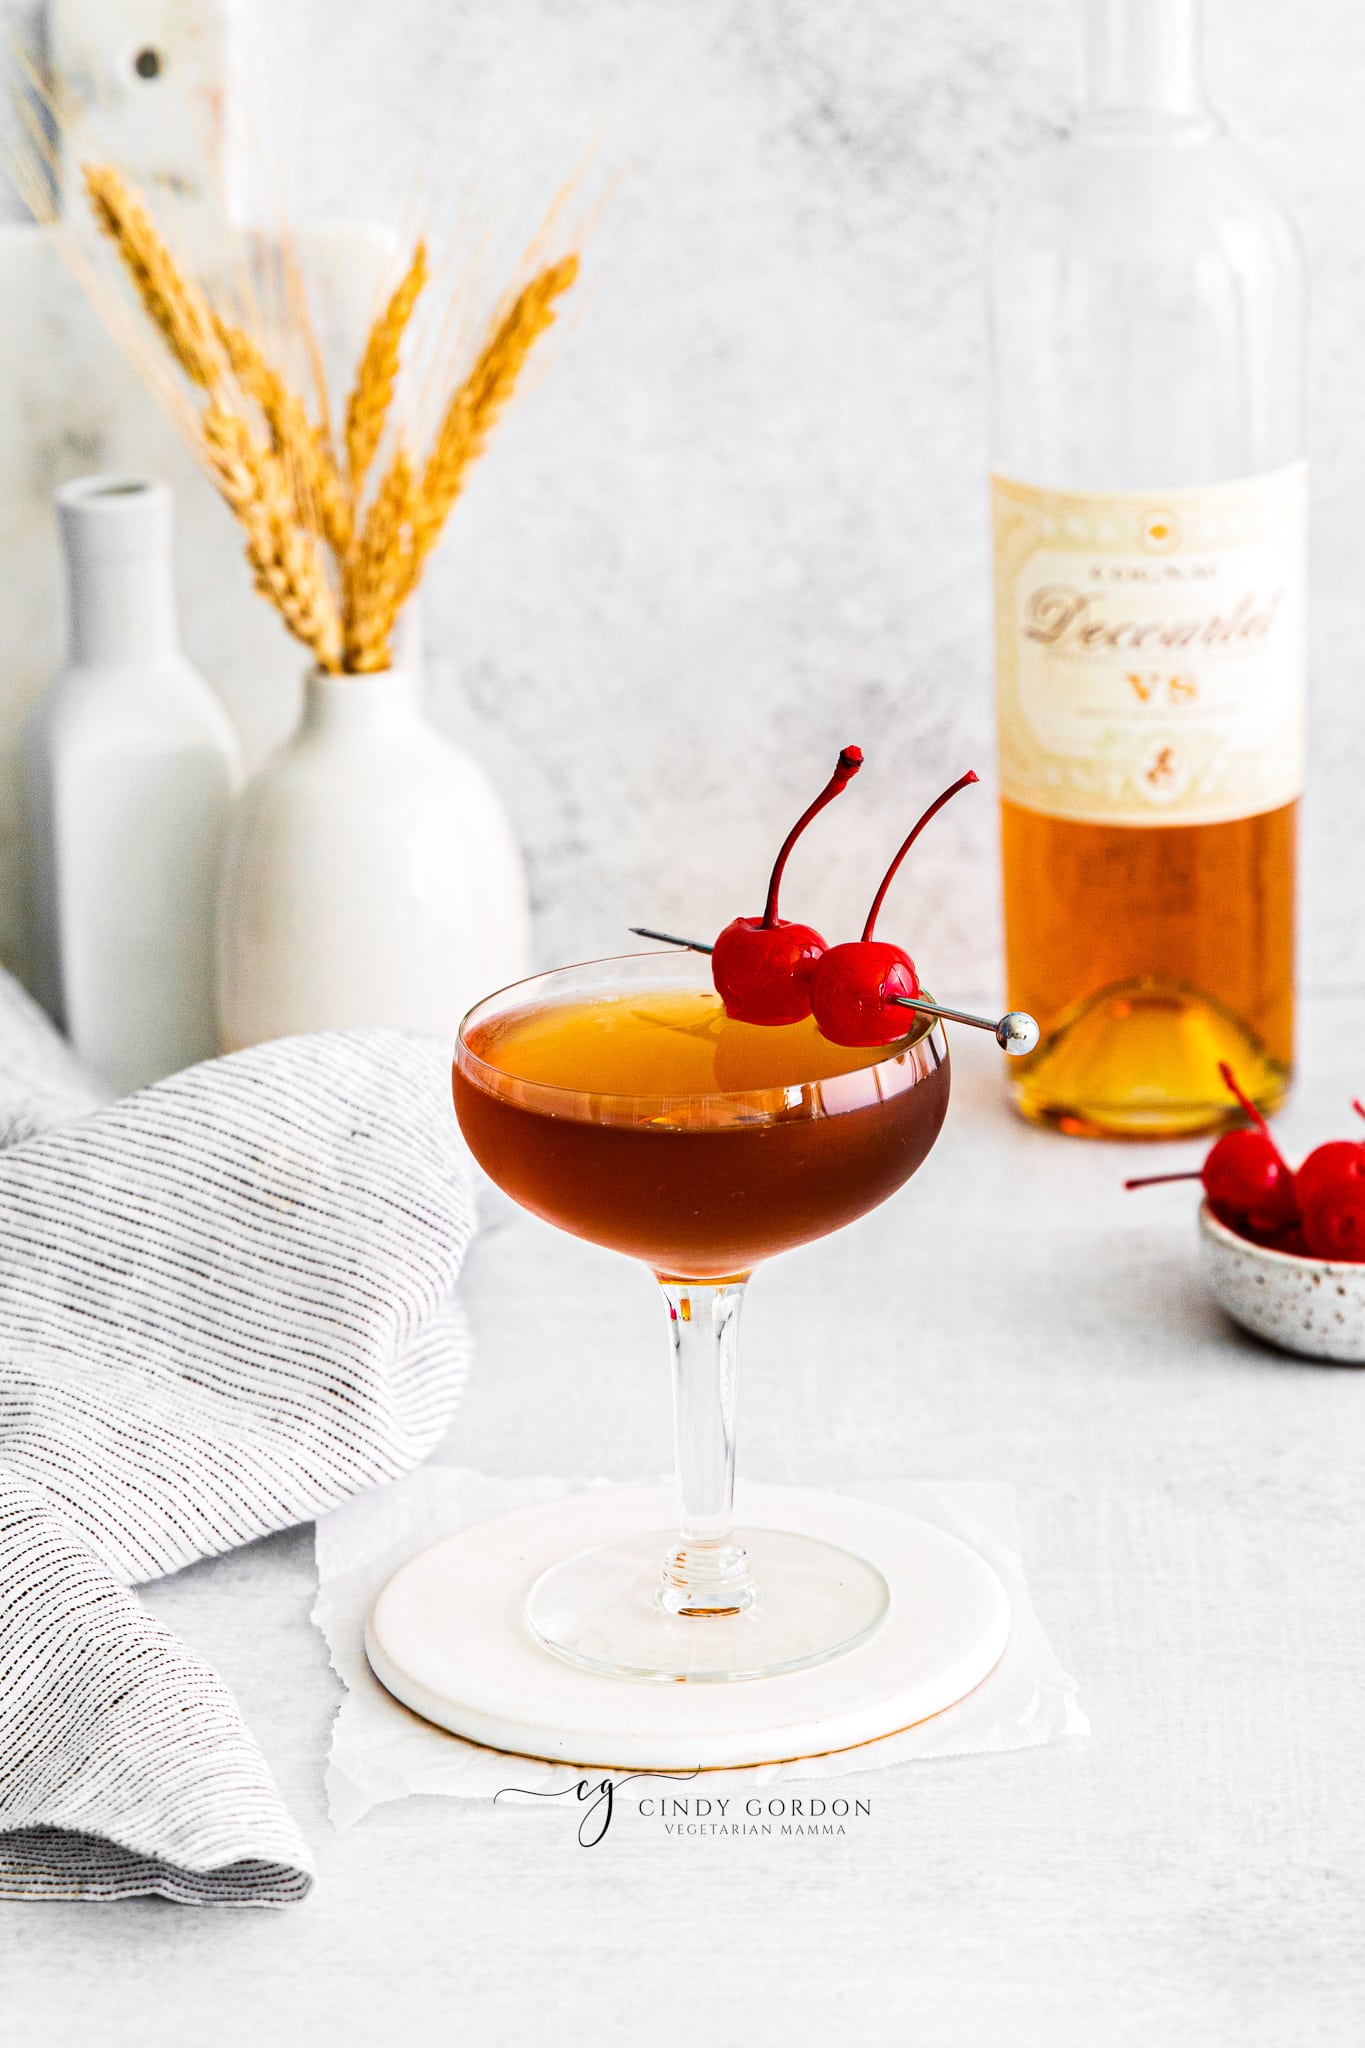 Pictured is a brandy manhattan. One glass full of orange and brown liquid with two cherries on stop. a bottle of brandy in the background with some cherries on a plate.